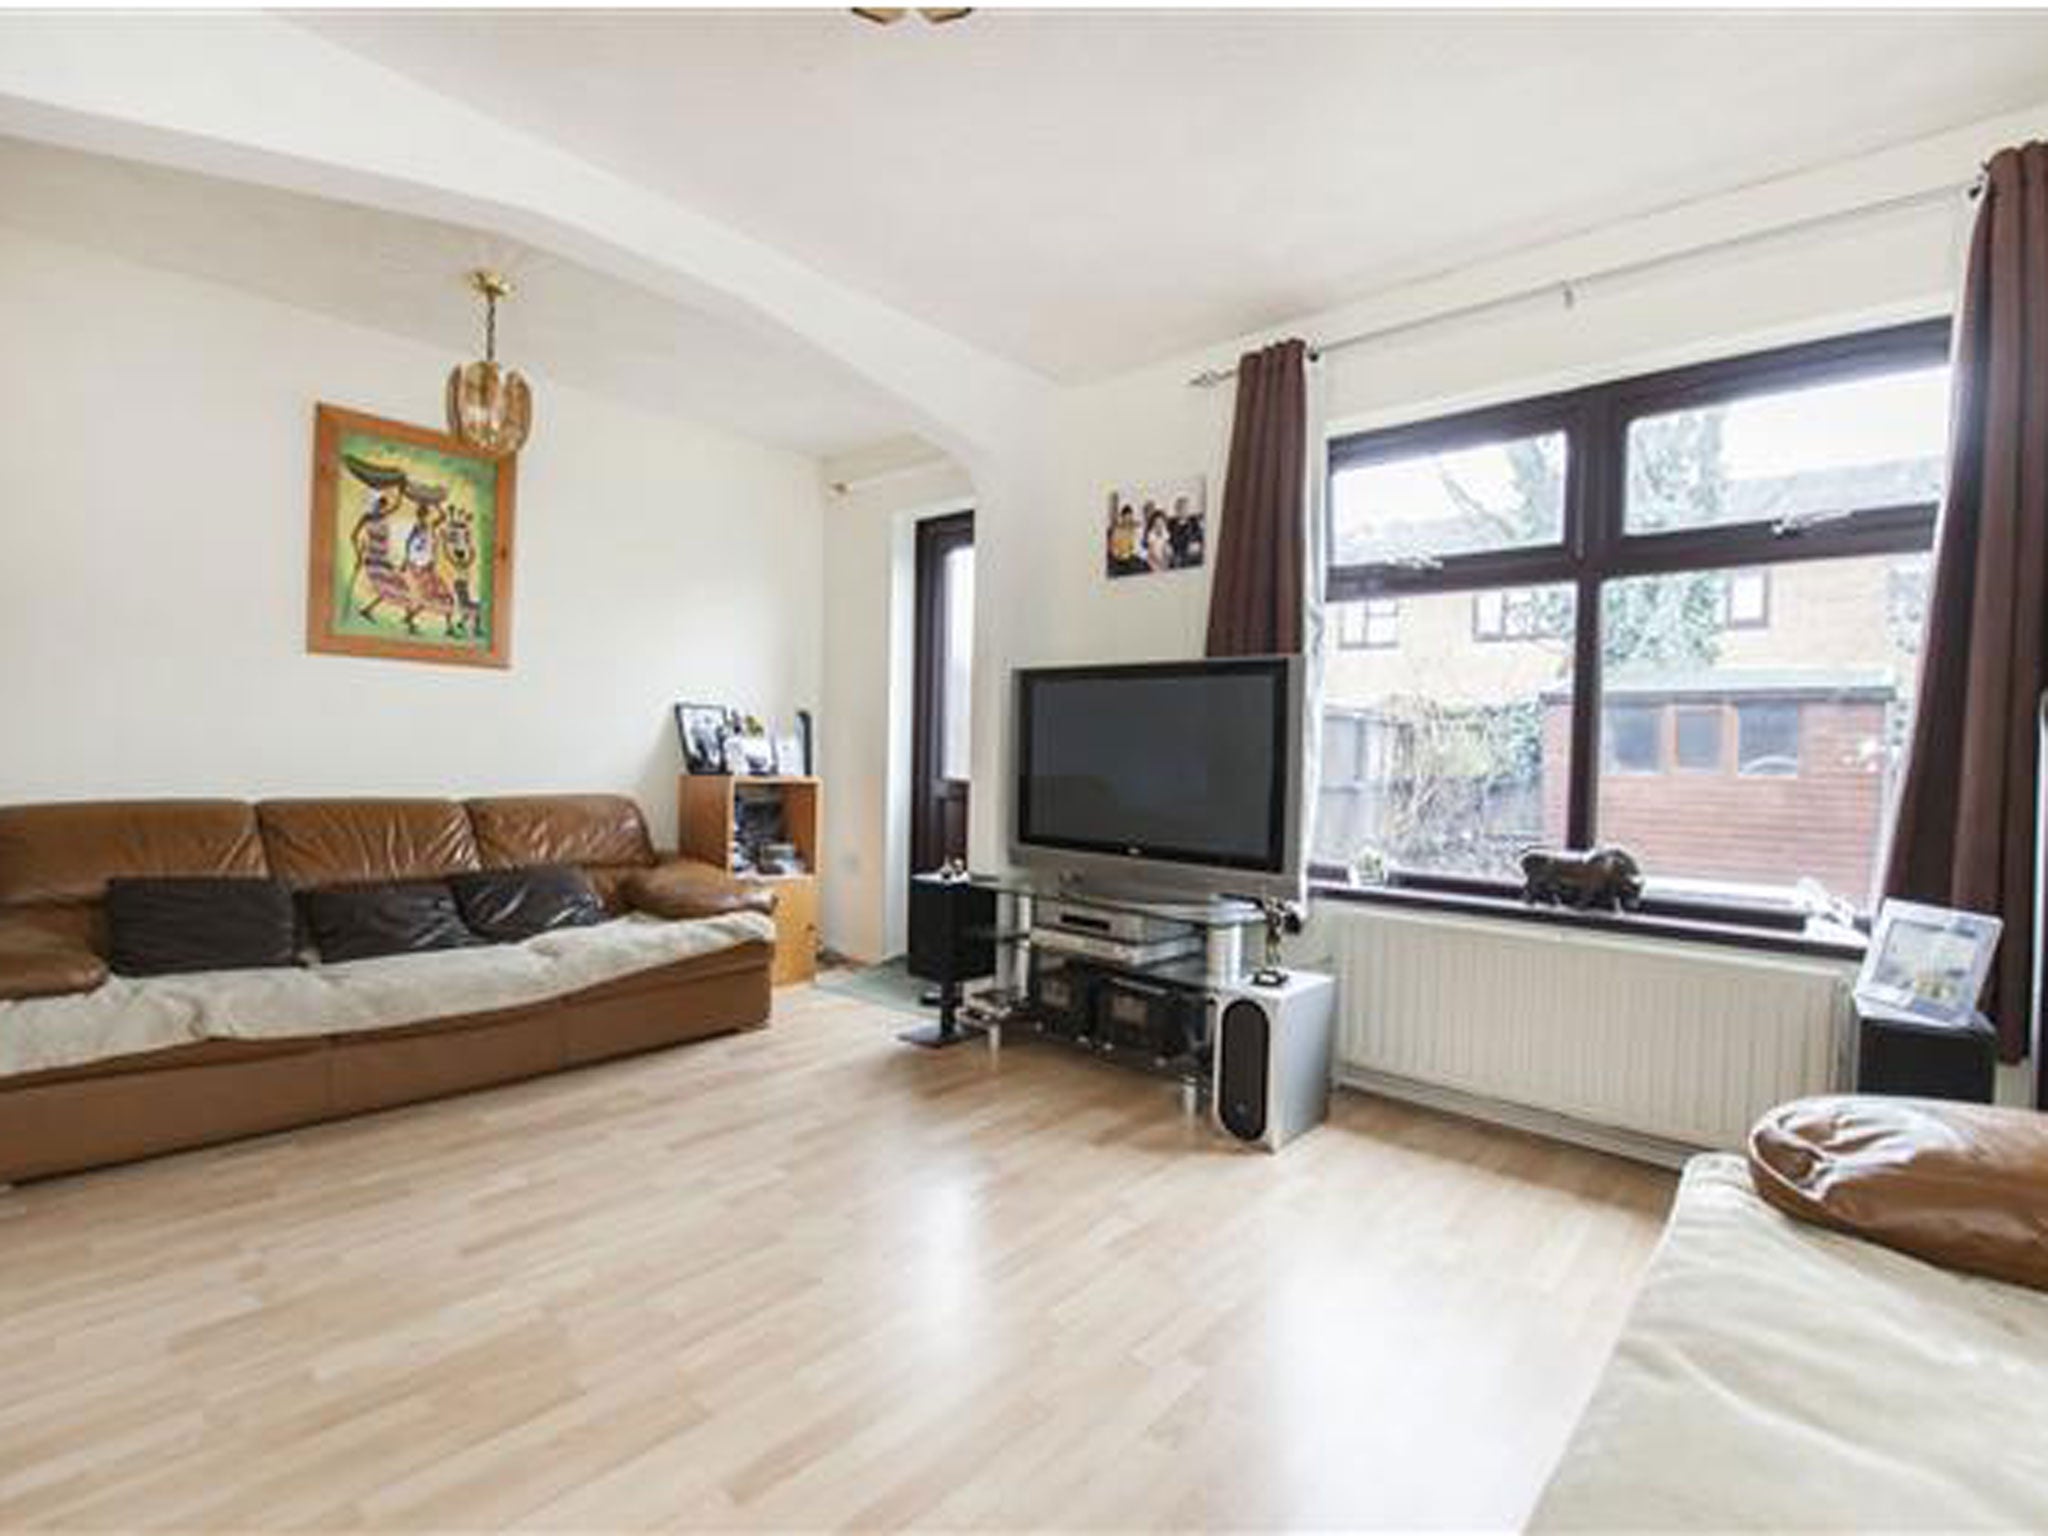 Newham: Three bedroom terraced for sale in Skiers Street, London E15. On for £300,000 with Felicity J Lord